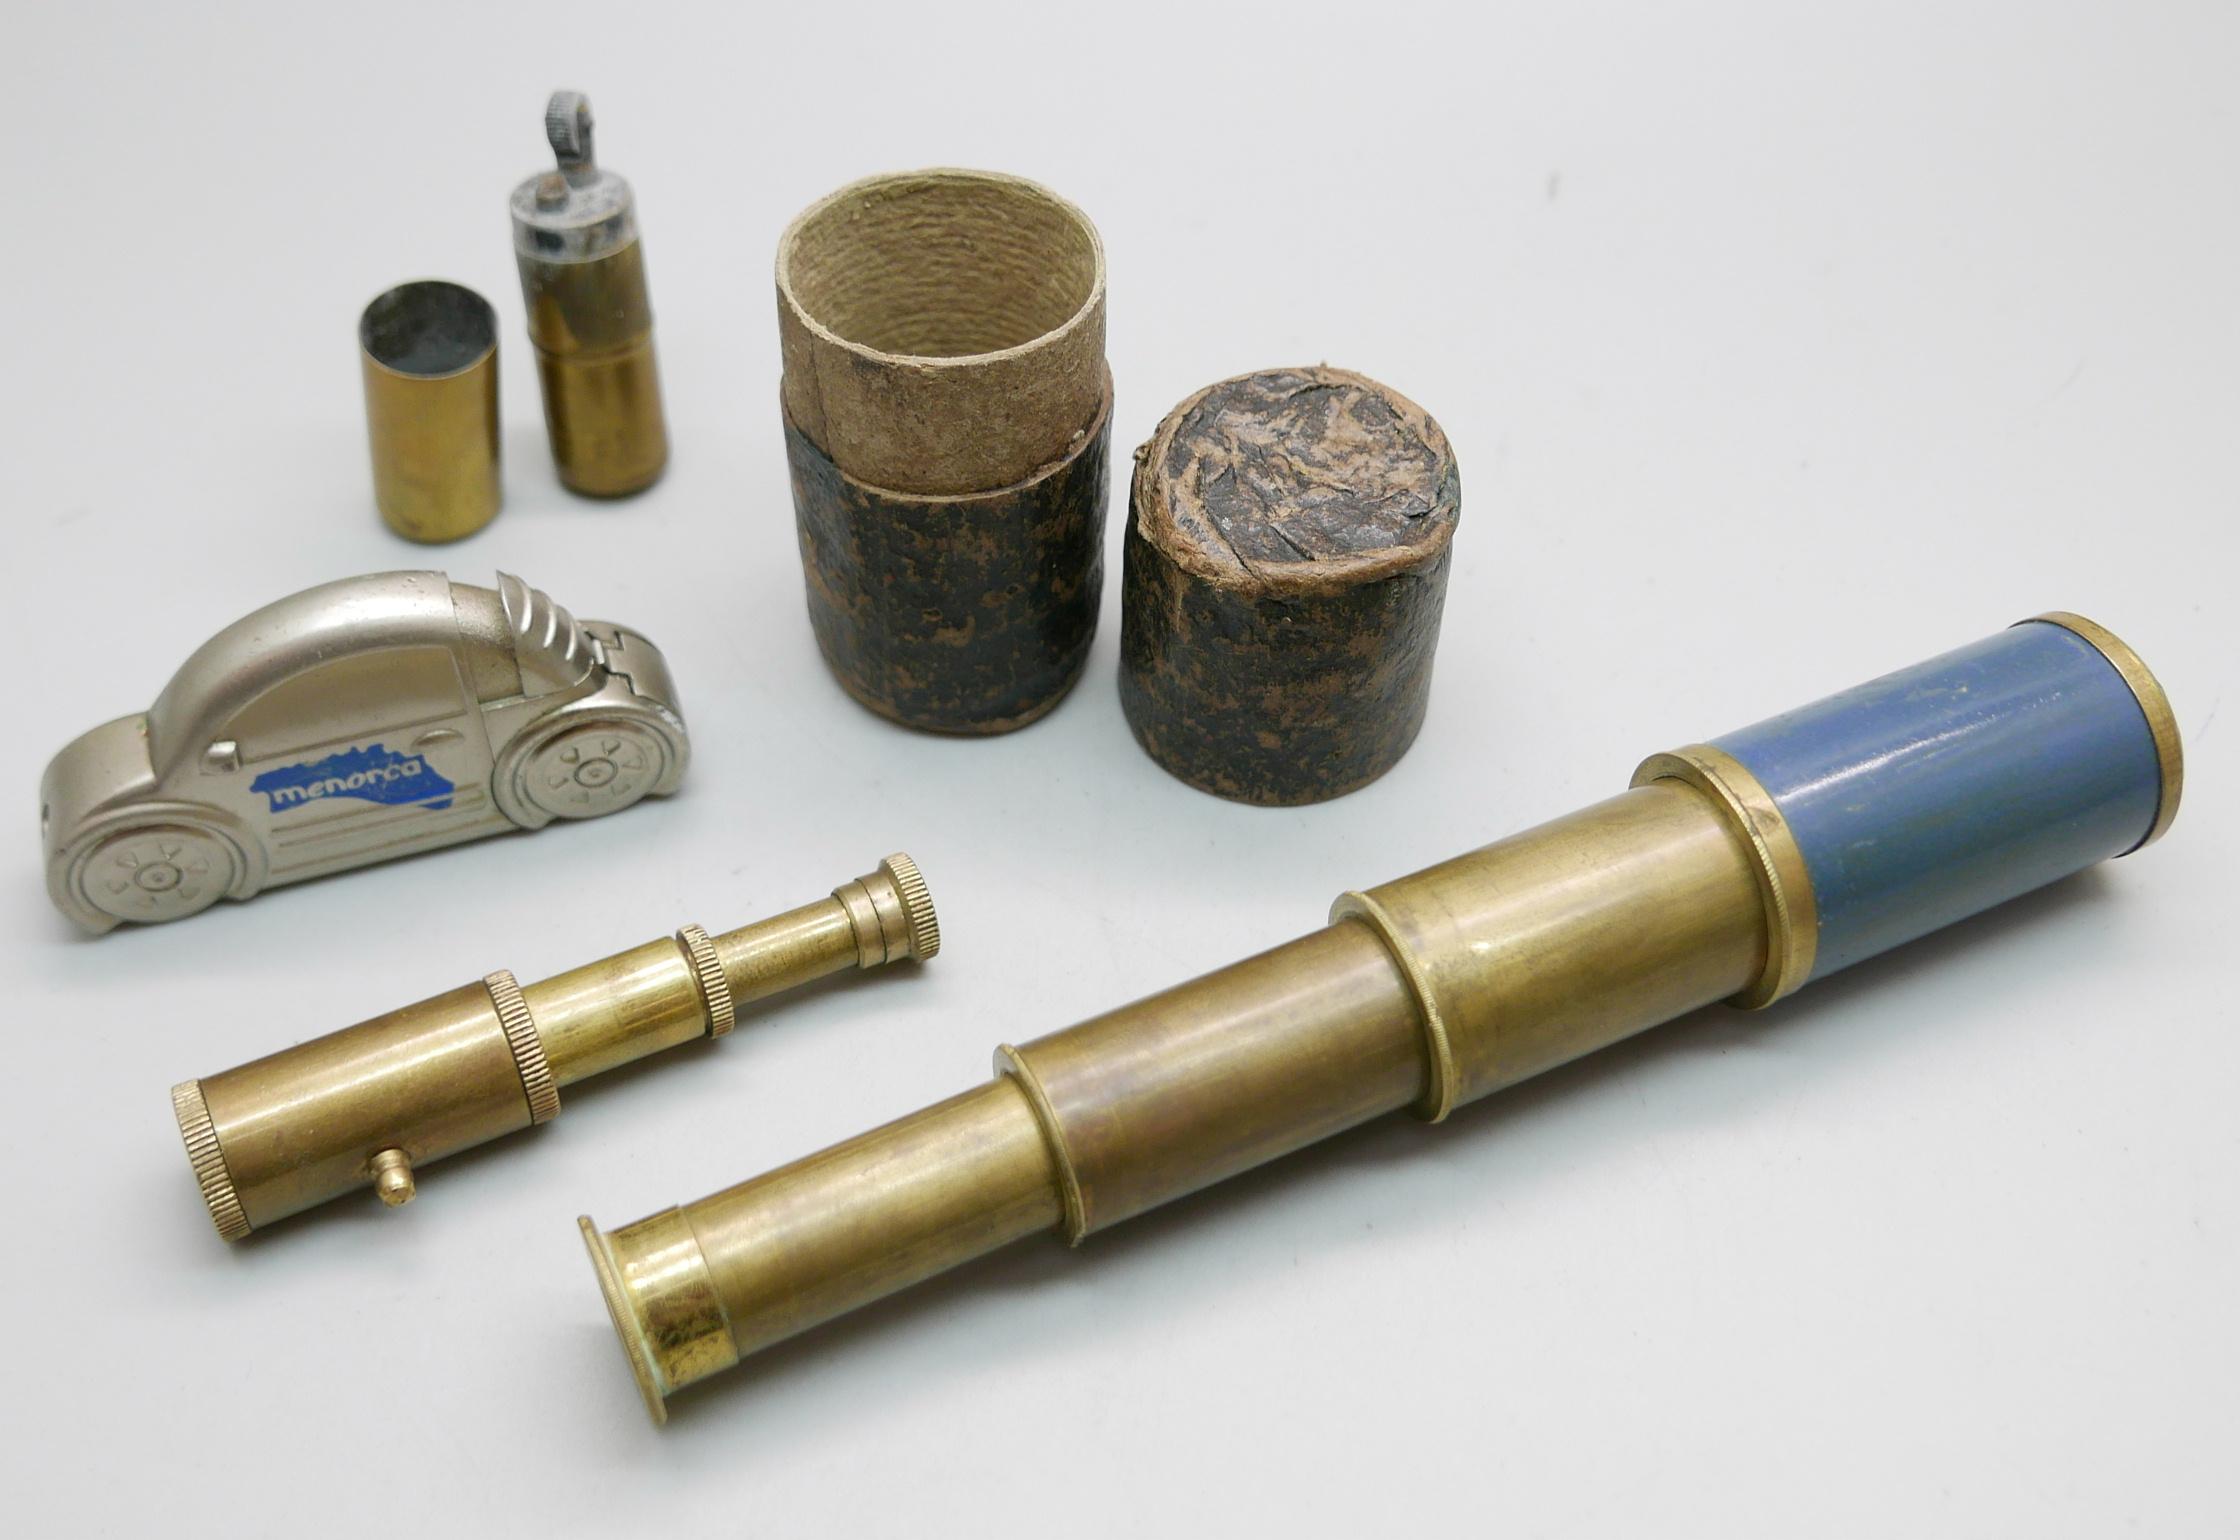 A brass trench art type lighter, a pocket telescope, with case, and one other small telescope and - Image 2 of 2